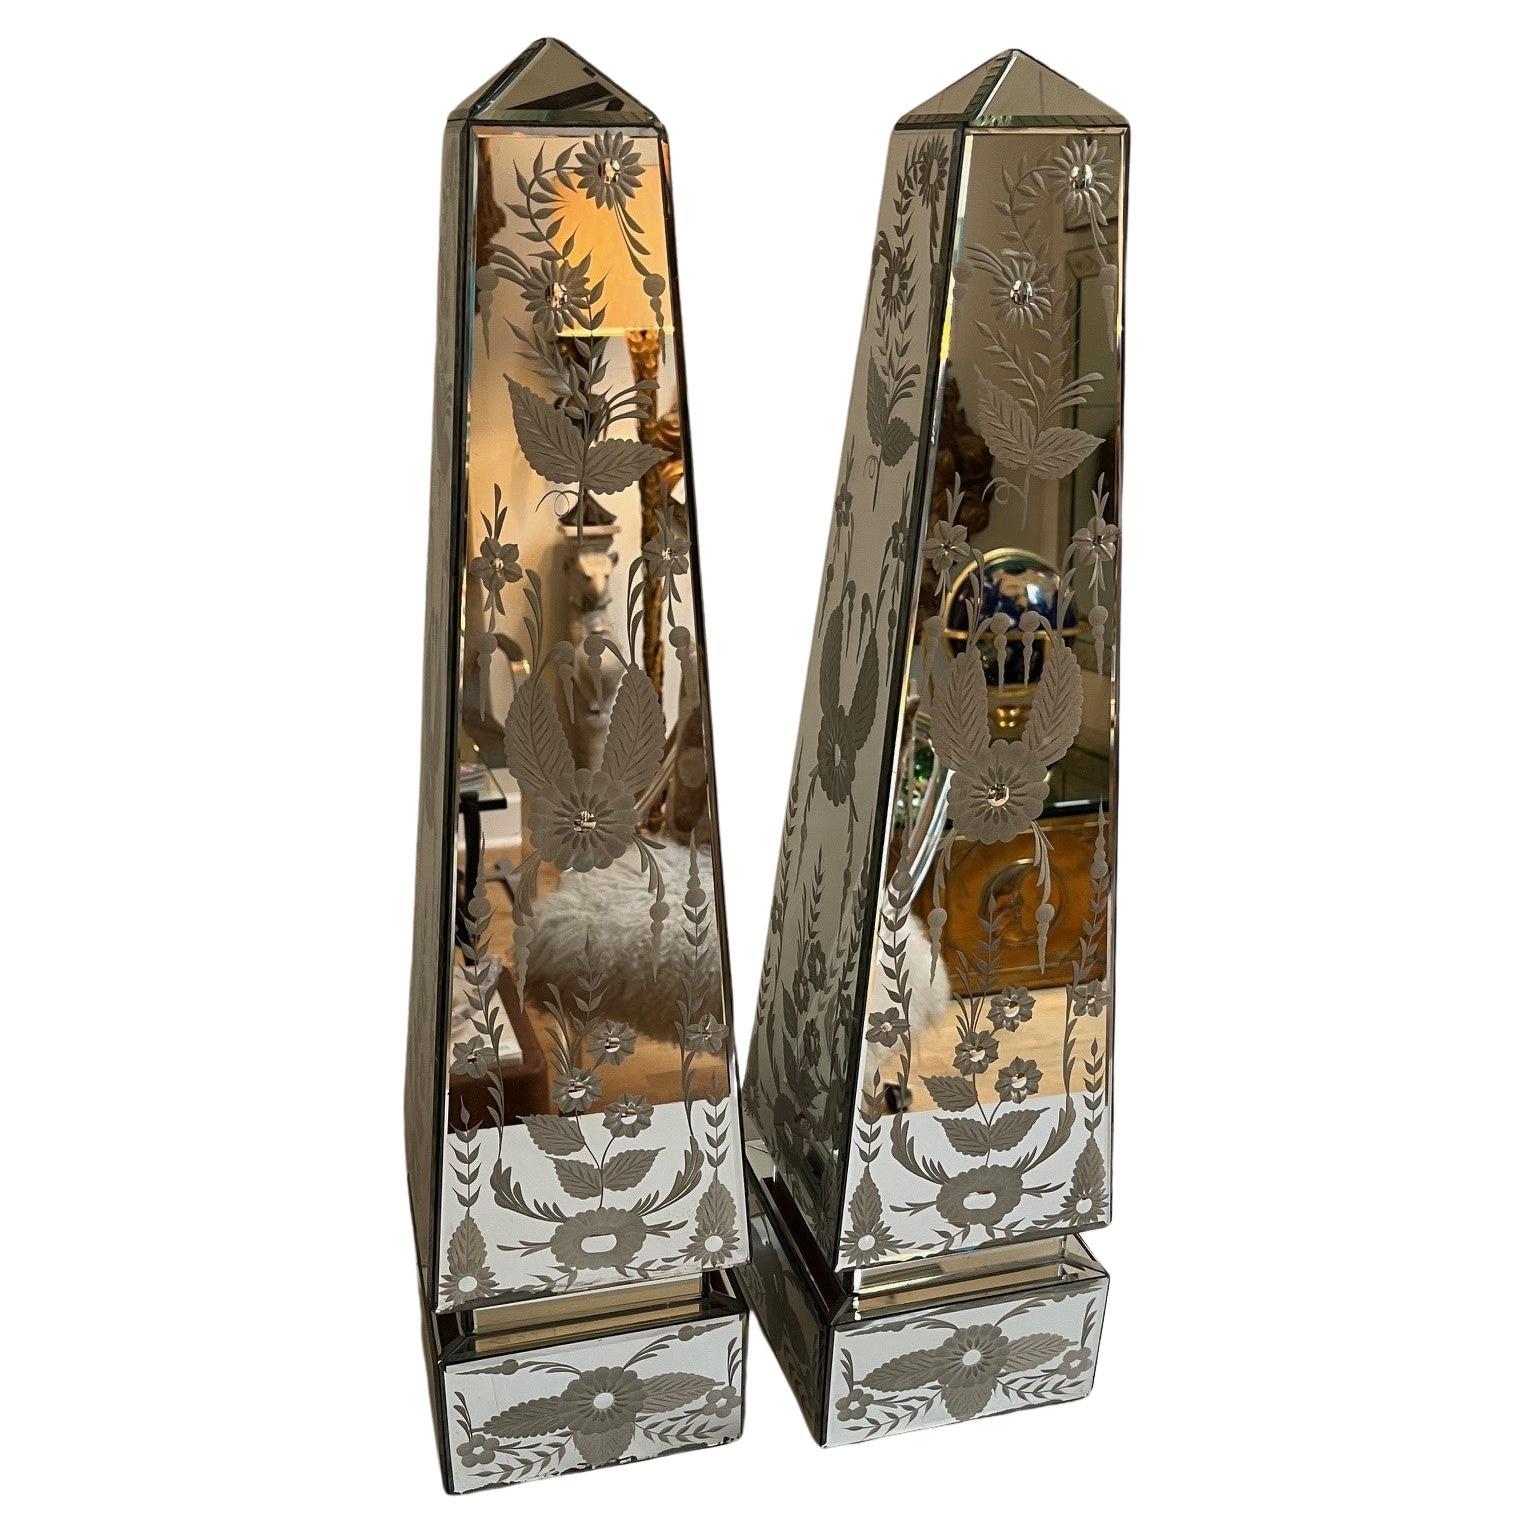 Pair of Exquisite Etched Floral Designs Mirrored Obelisk